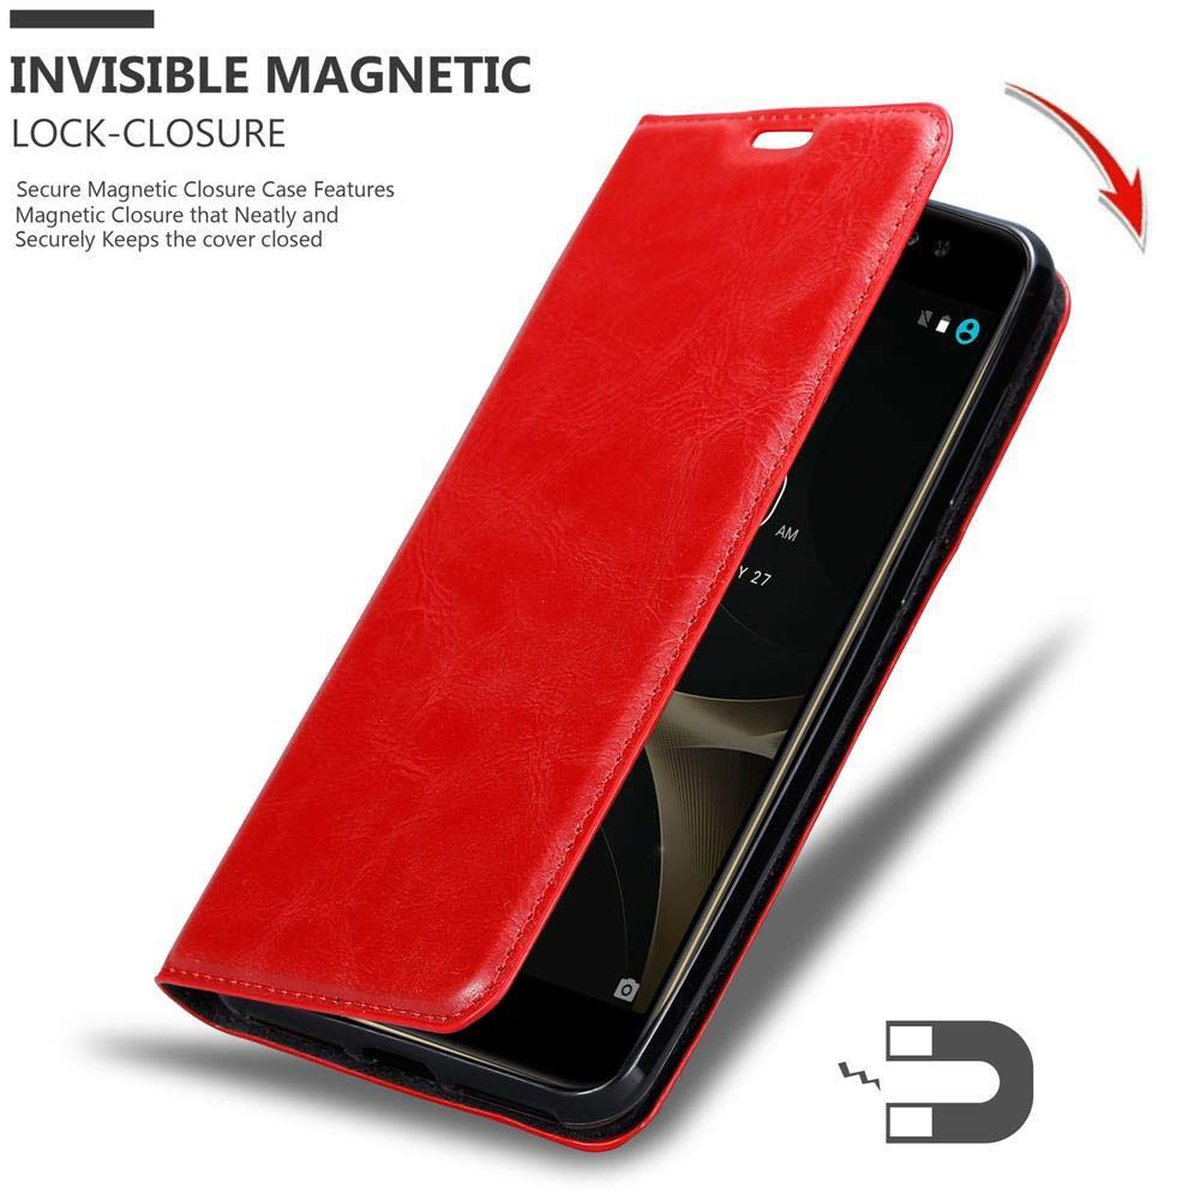 Bookcover, Hülle N1 Nubia Invisible Magnet, APFEL CADORABO ROT Book ZTE, LITE,